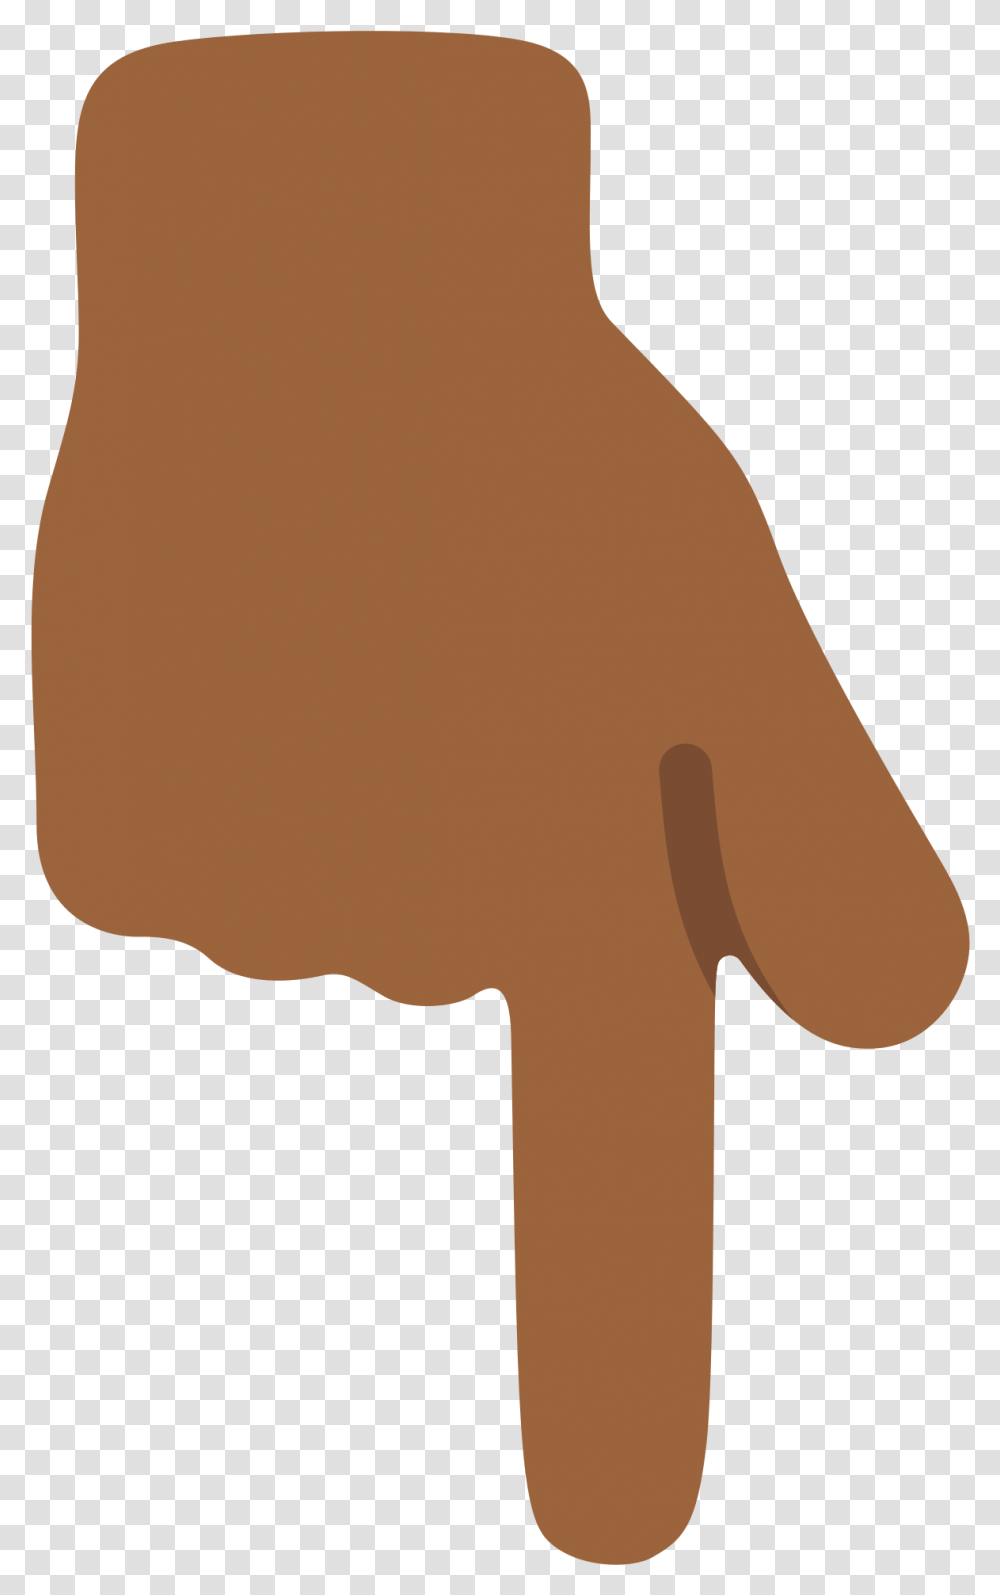 Finger Pointing Clipart Pointing Finger In Cartoons, Outdoors, Wood, Nature, Hand Transparent Png